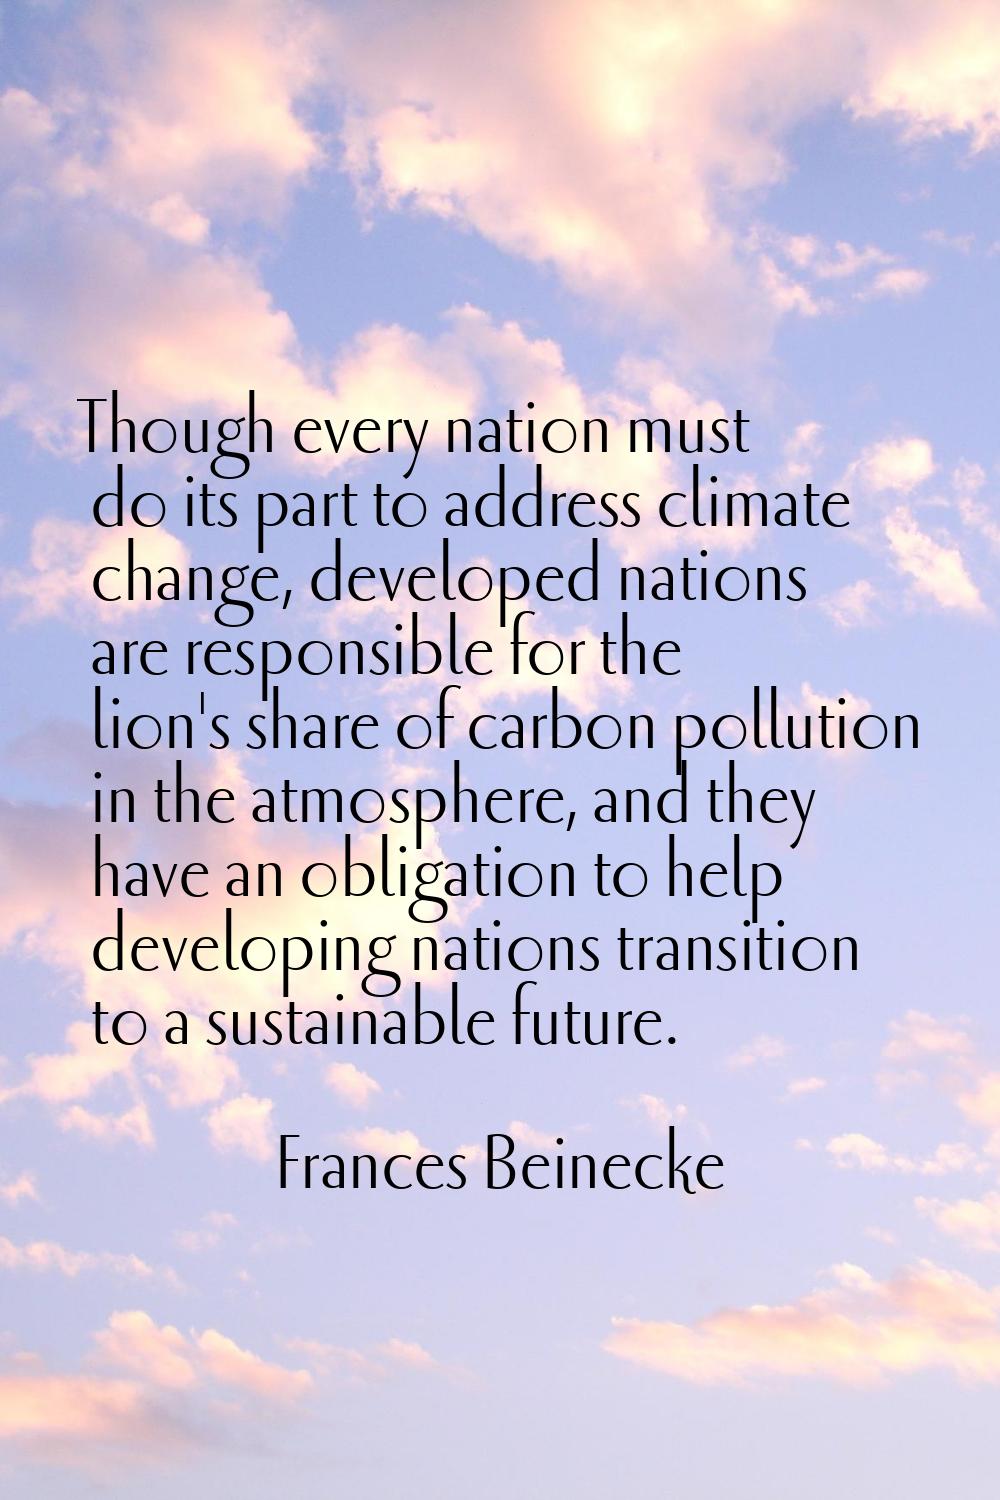 Though every nation must do its part to address climate change, developed nations are responsible f